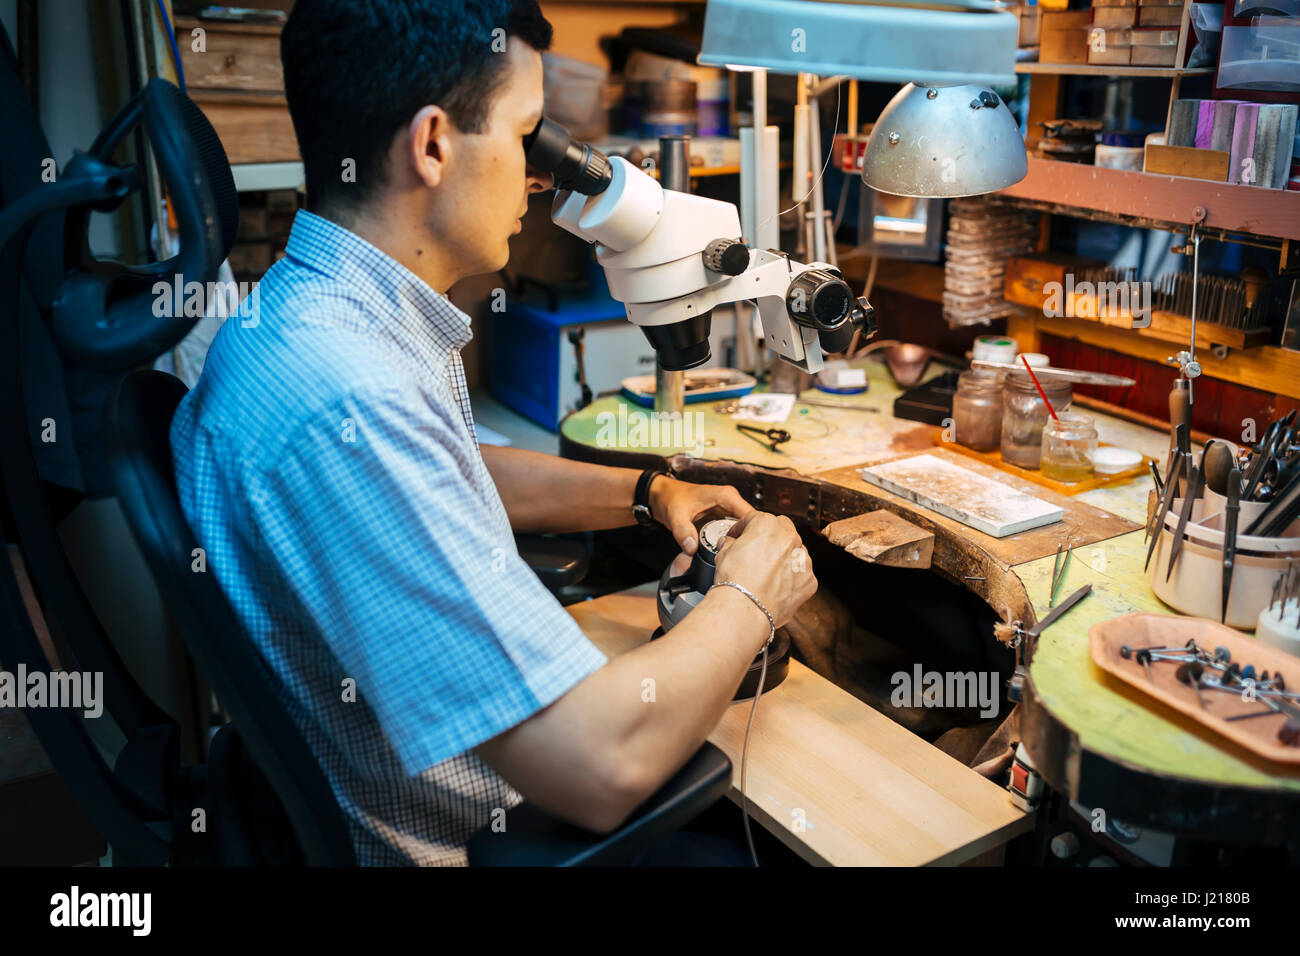 Precision work carried out by jeweler in workshop Stock Photo